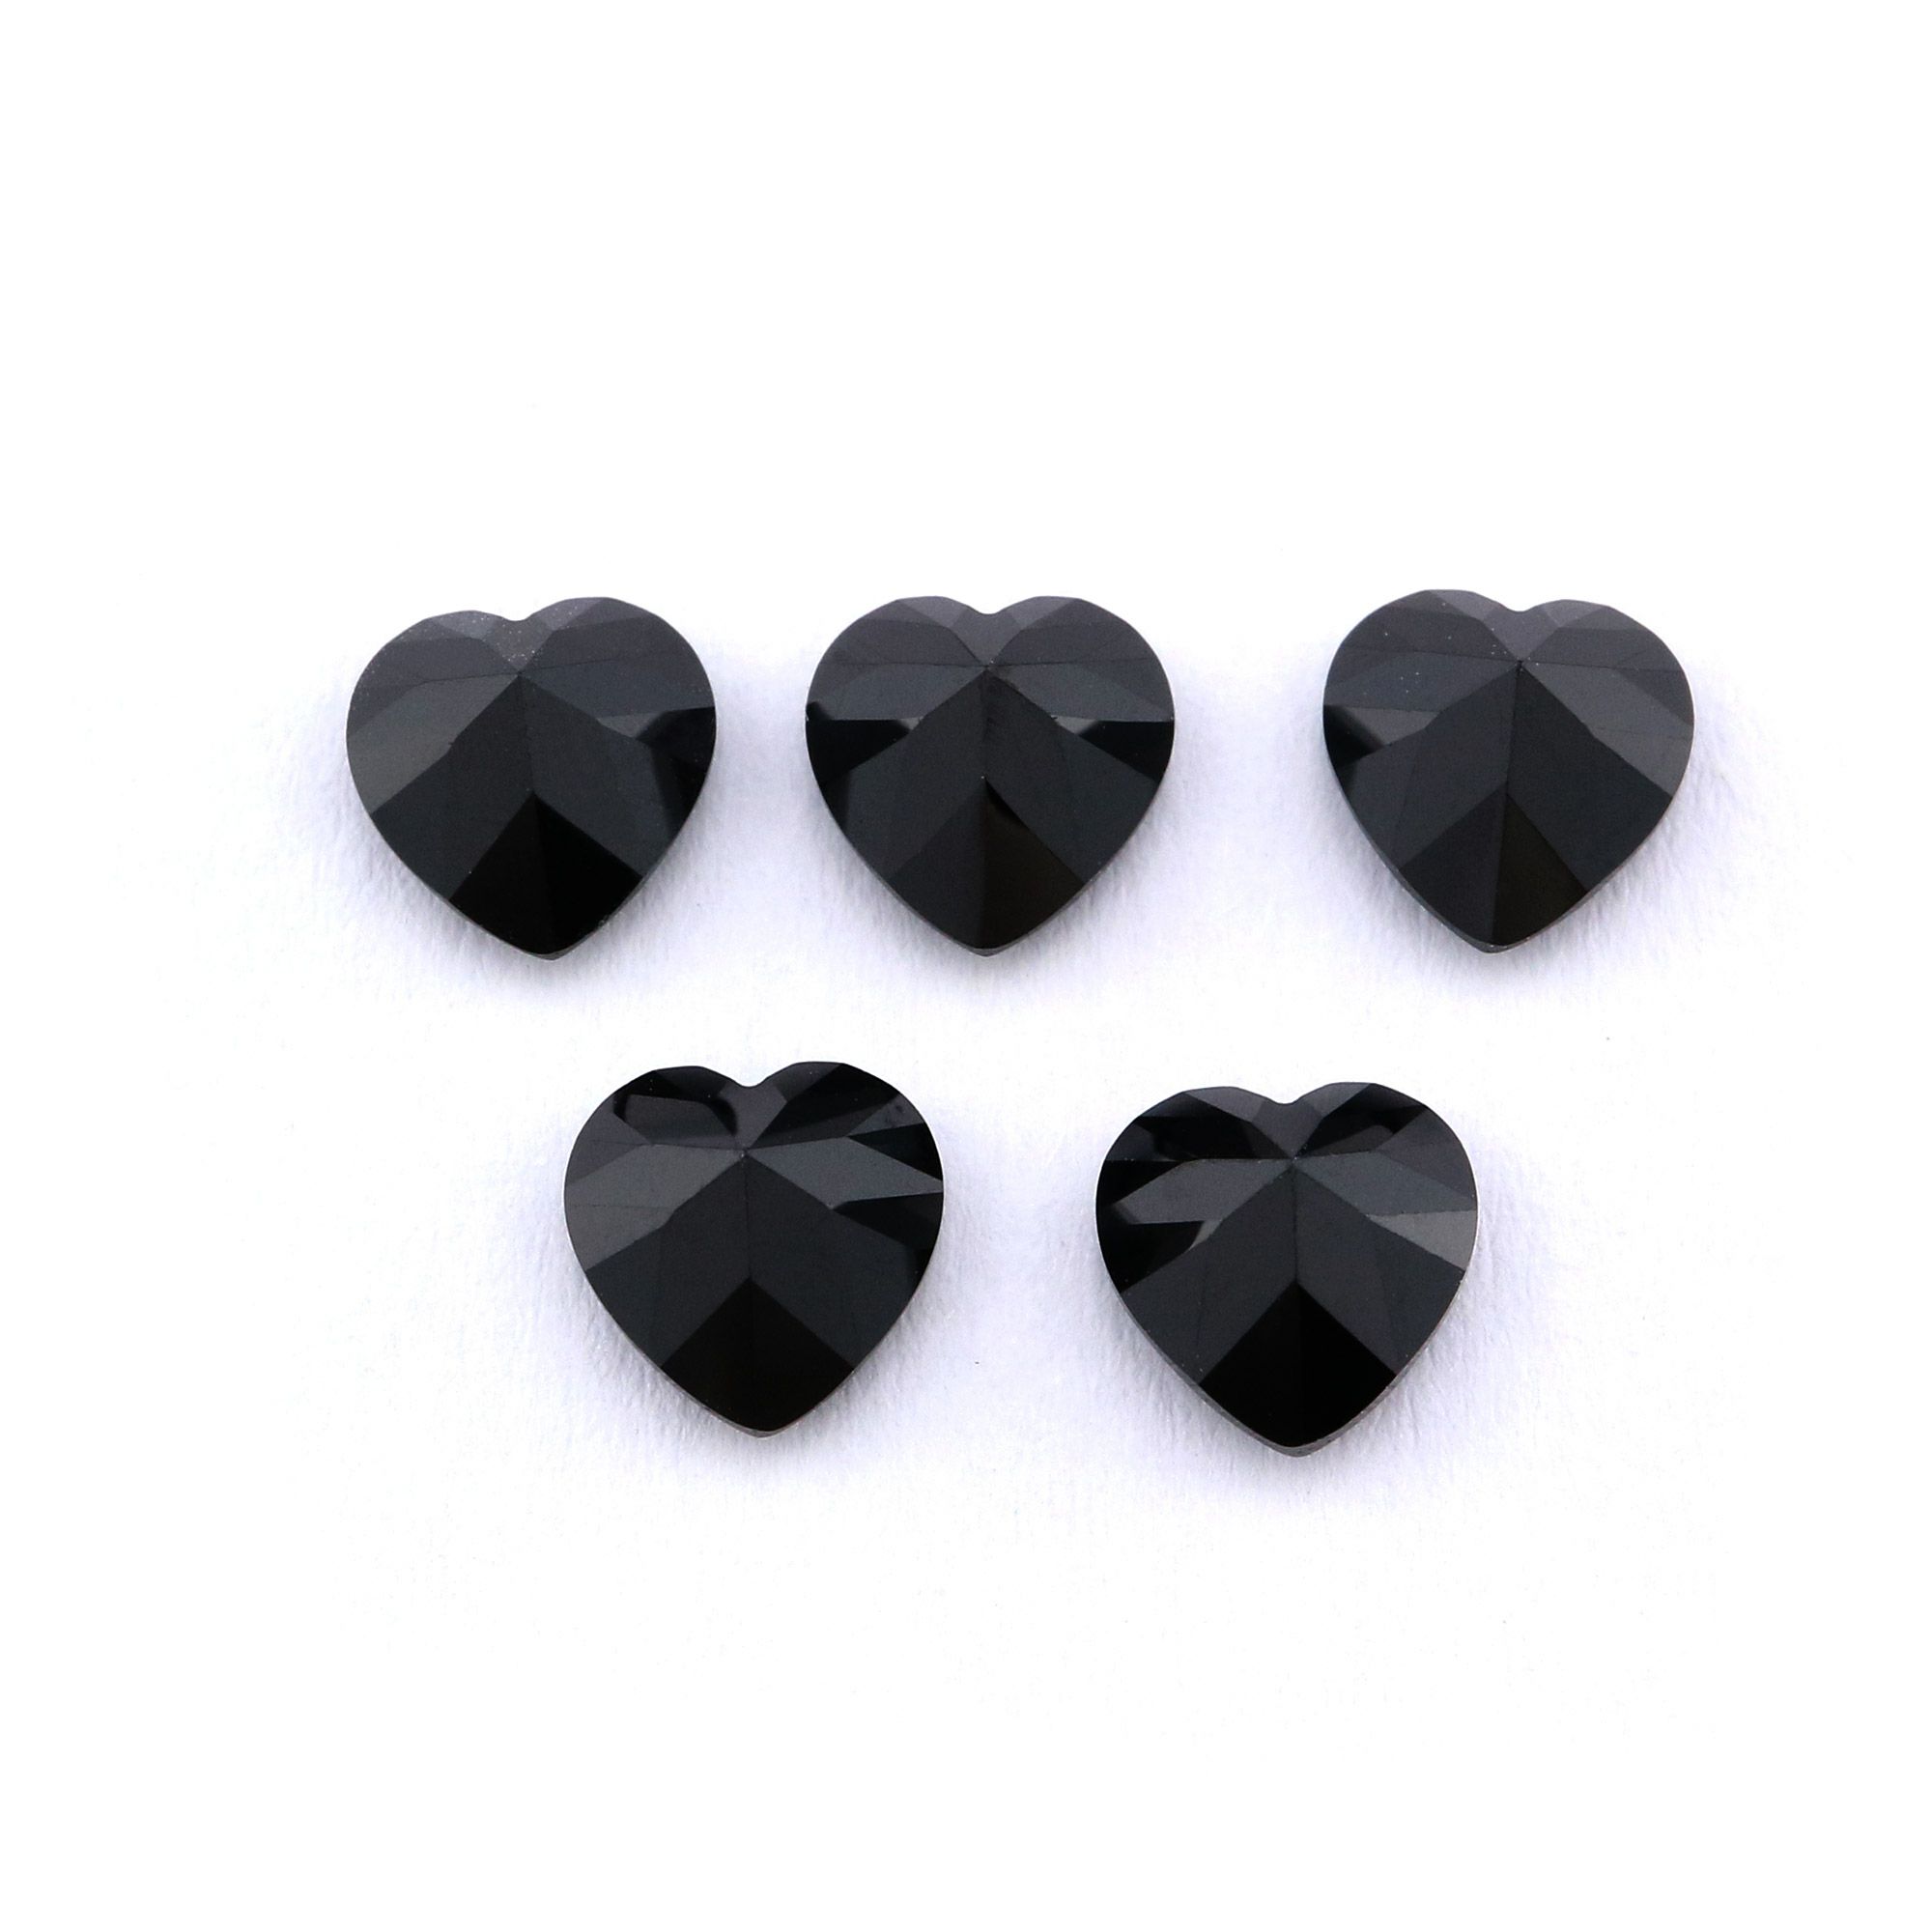 5Pcs 4-8MM Heart Black Spinel Faceted Cut Loose Gemstone Natural Semi Precious Stone DIY Jewelry Supplies 4130011 - Click Image to Close